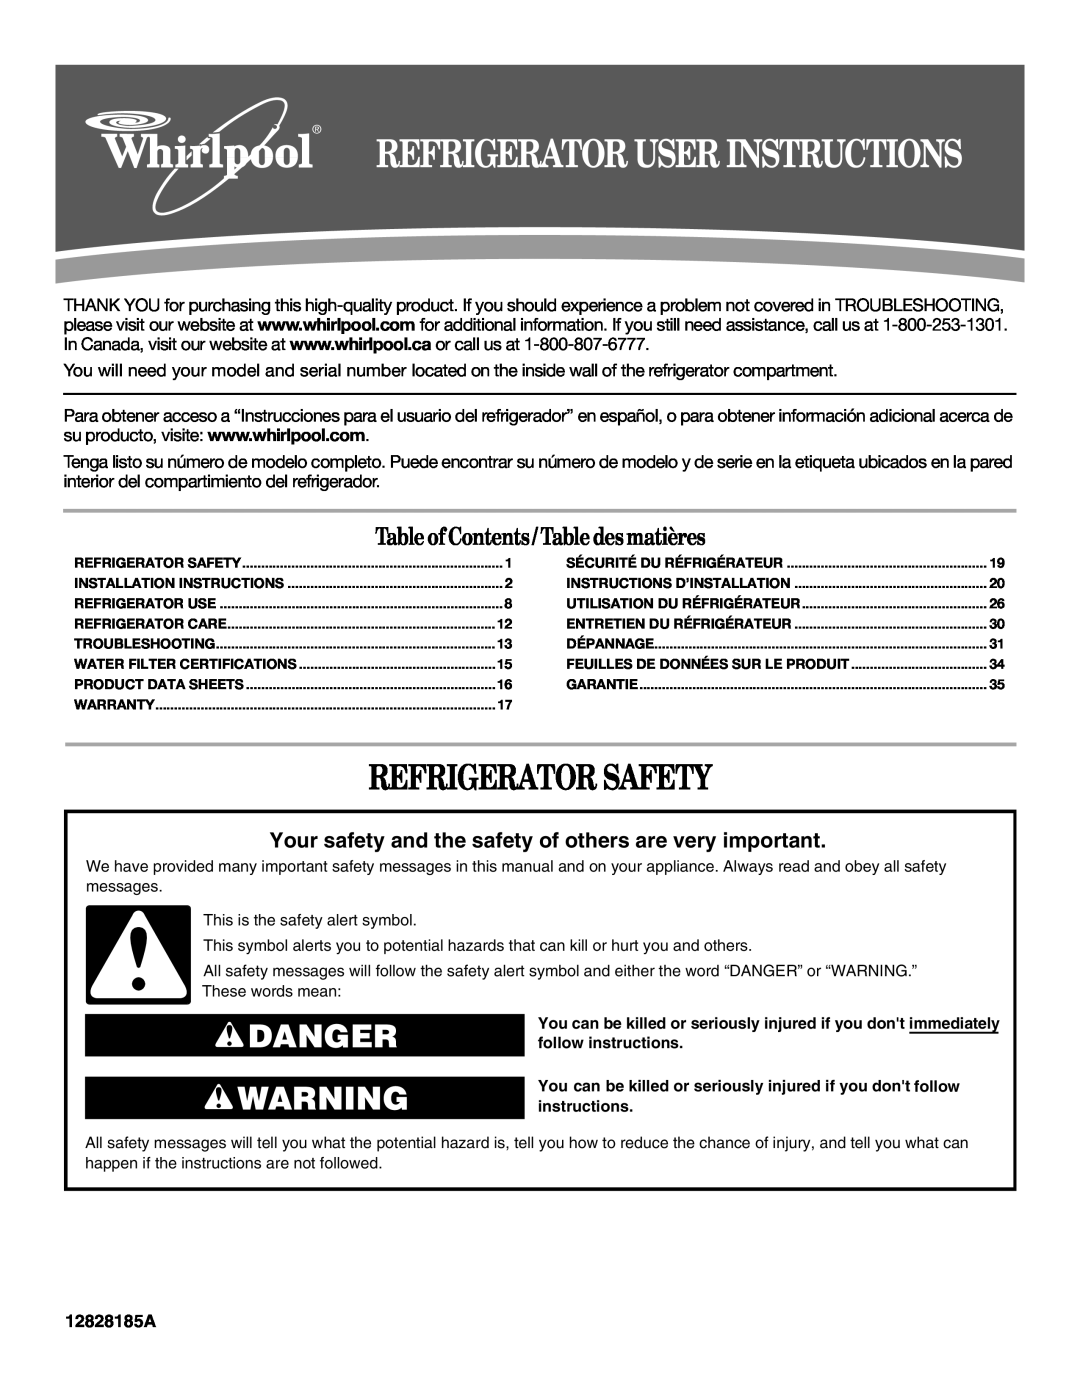 Whirlpool 12828185A installation instructions Refrigerator Safety, Danger, Table of Contents / Table desmatières 